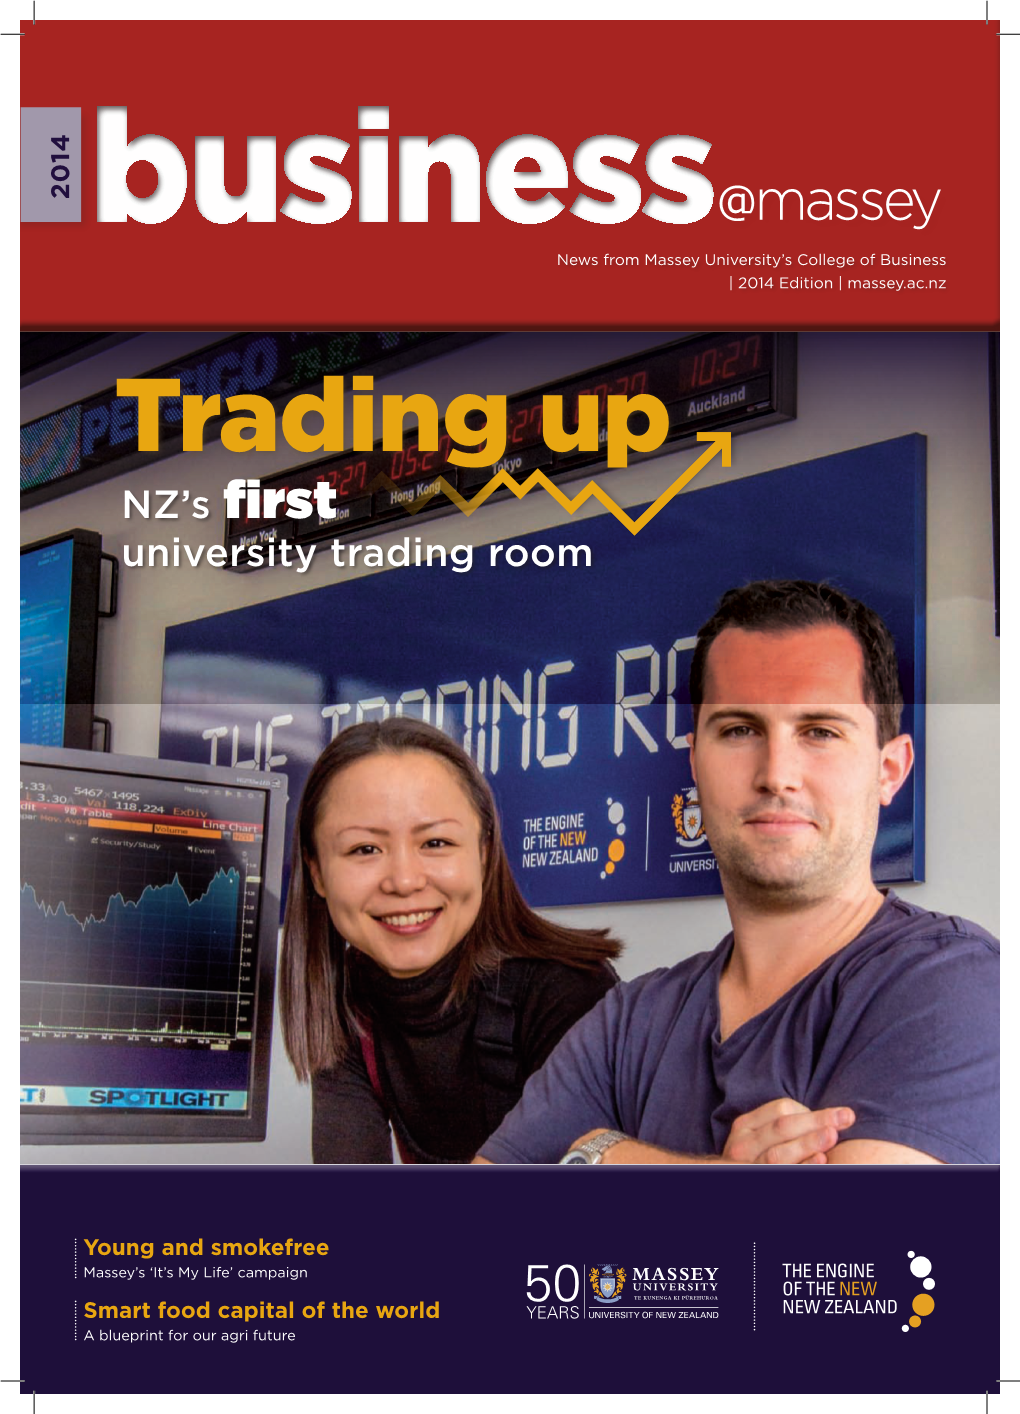 Trading up NZ’S First University Trading Room